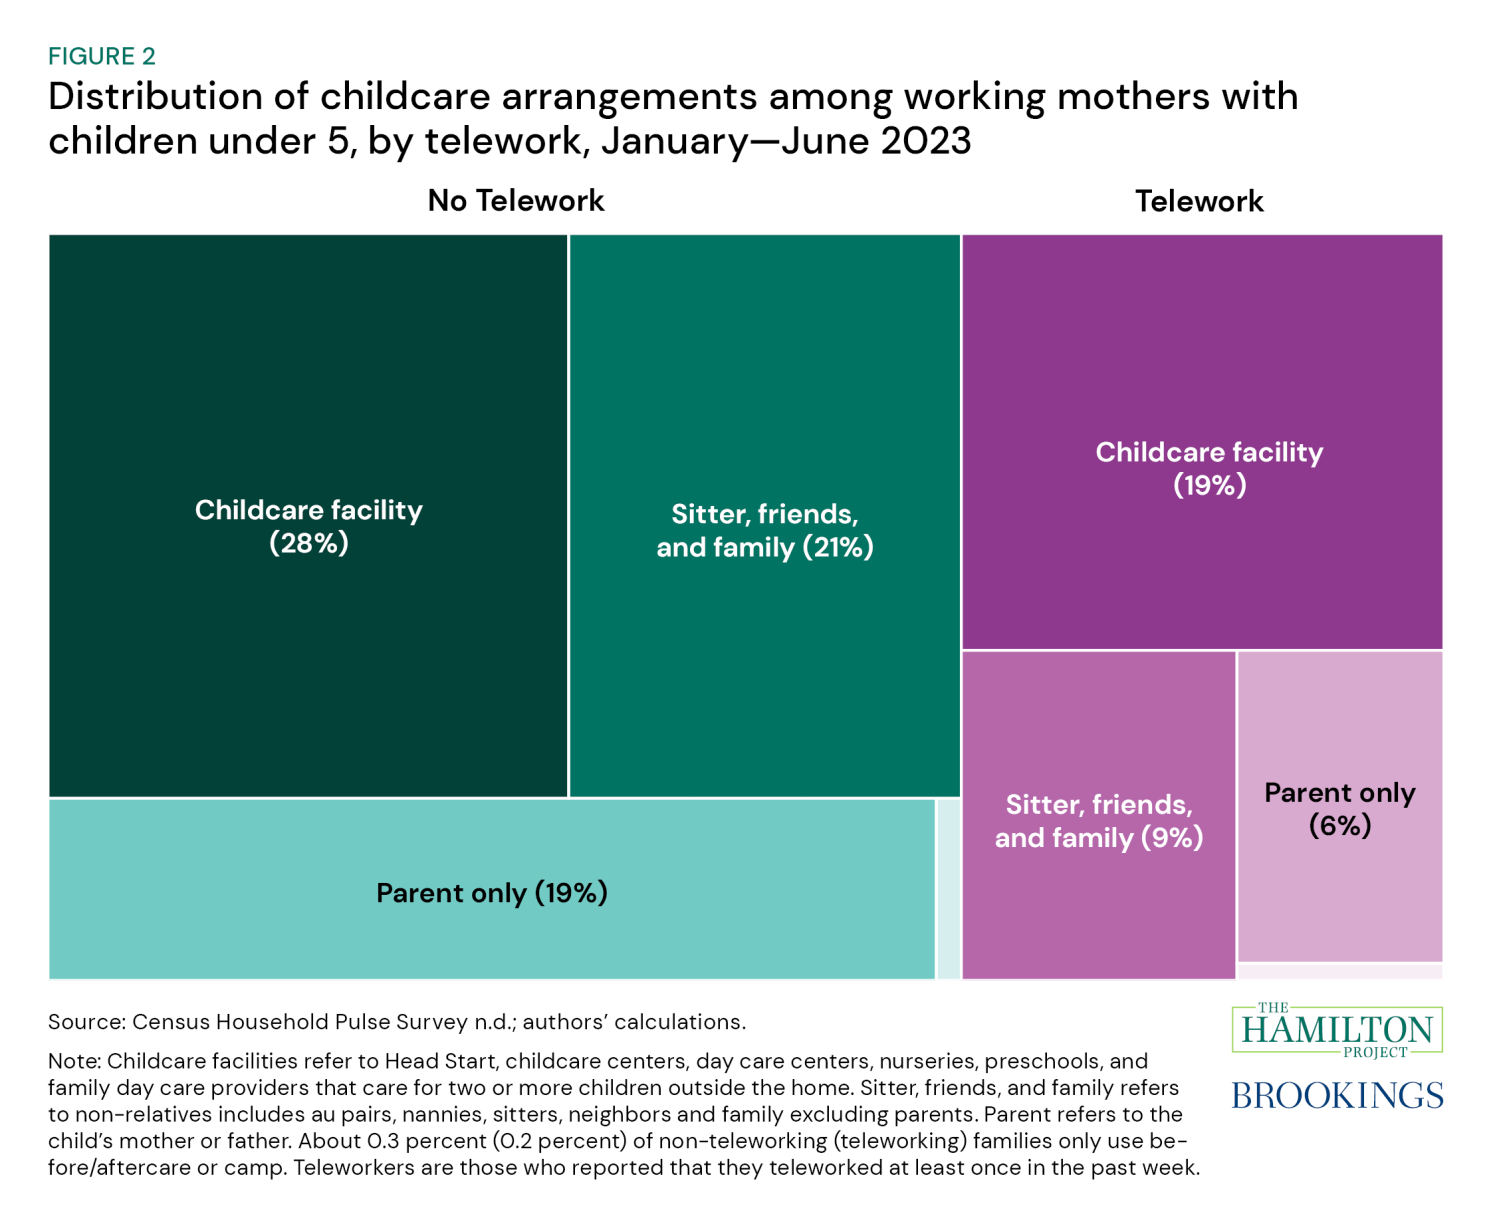 Figure 2. Distribution of childcare arrangements among working mothers with children under 5, by telework, January - June 2023